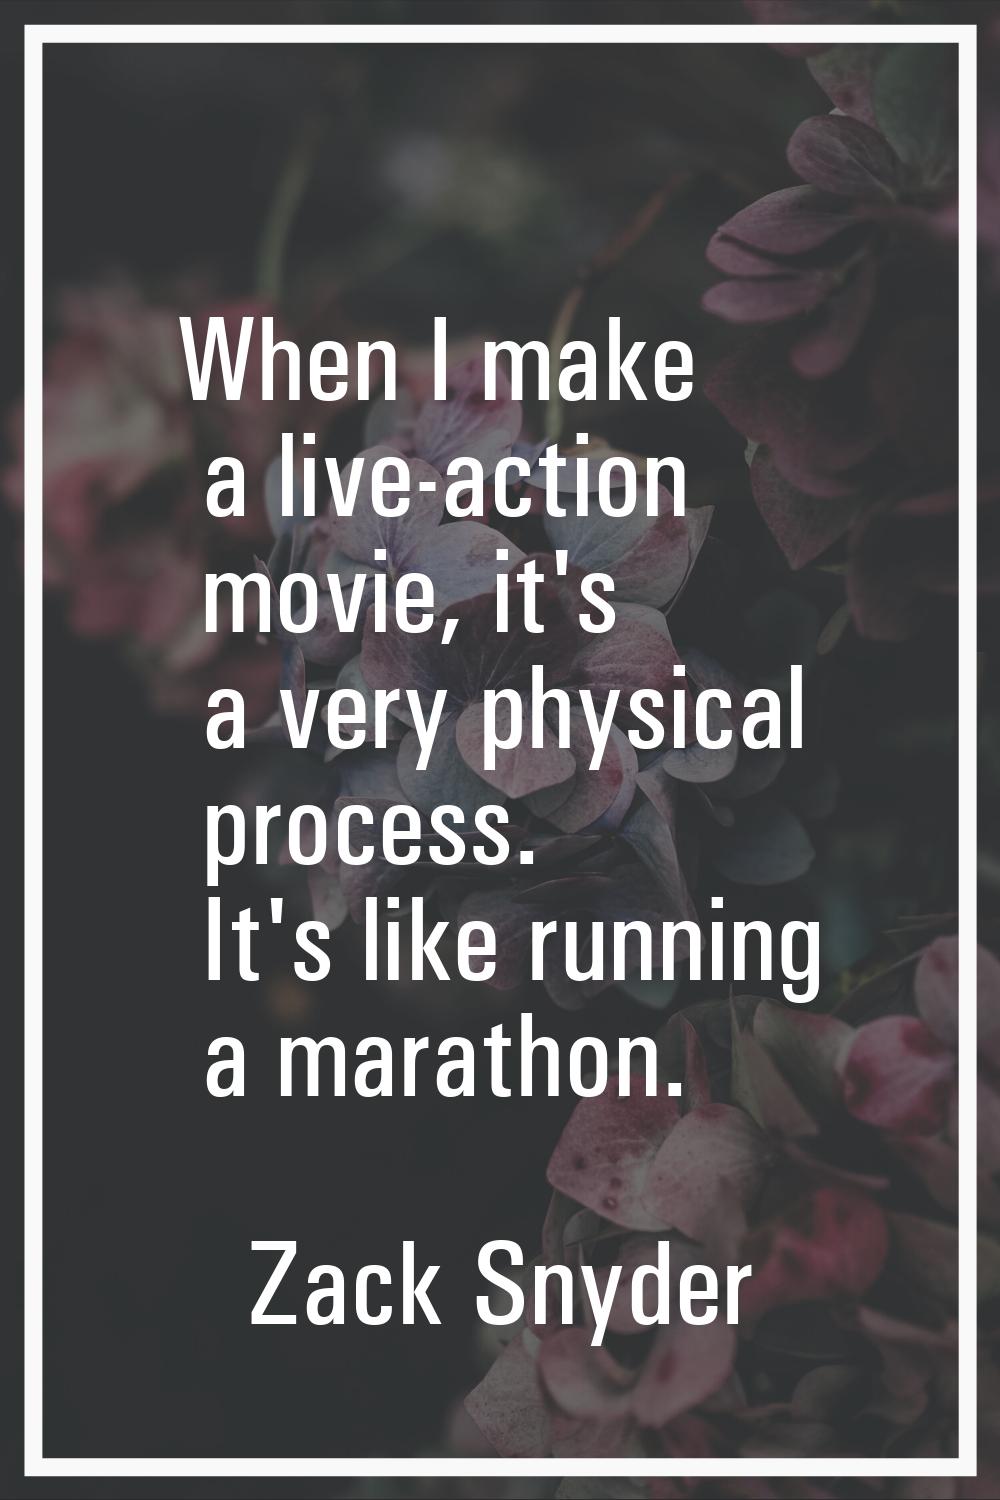 When I make a live-action movie, it's a very physical process. It's like running a marathon.